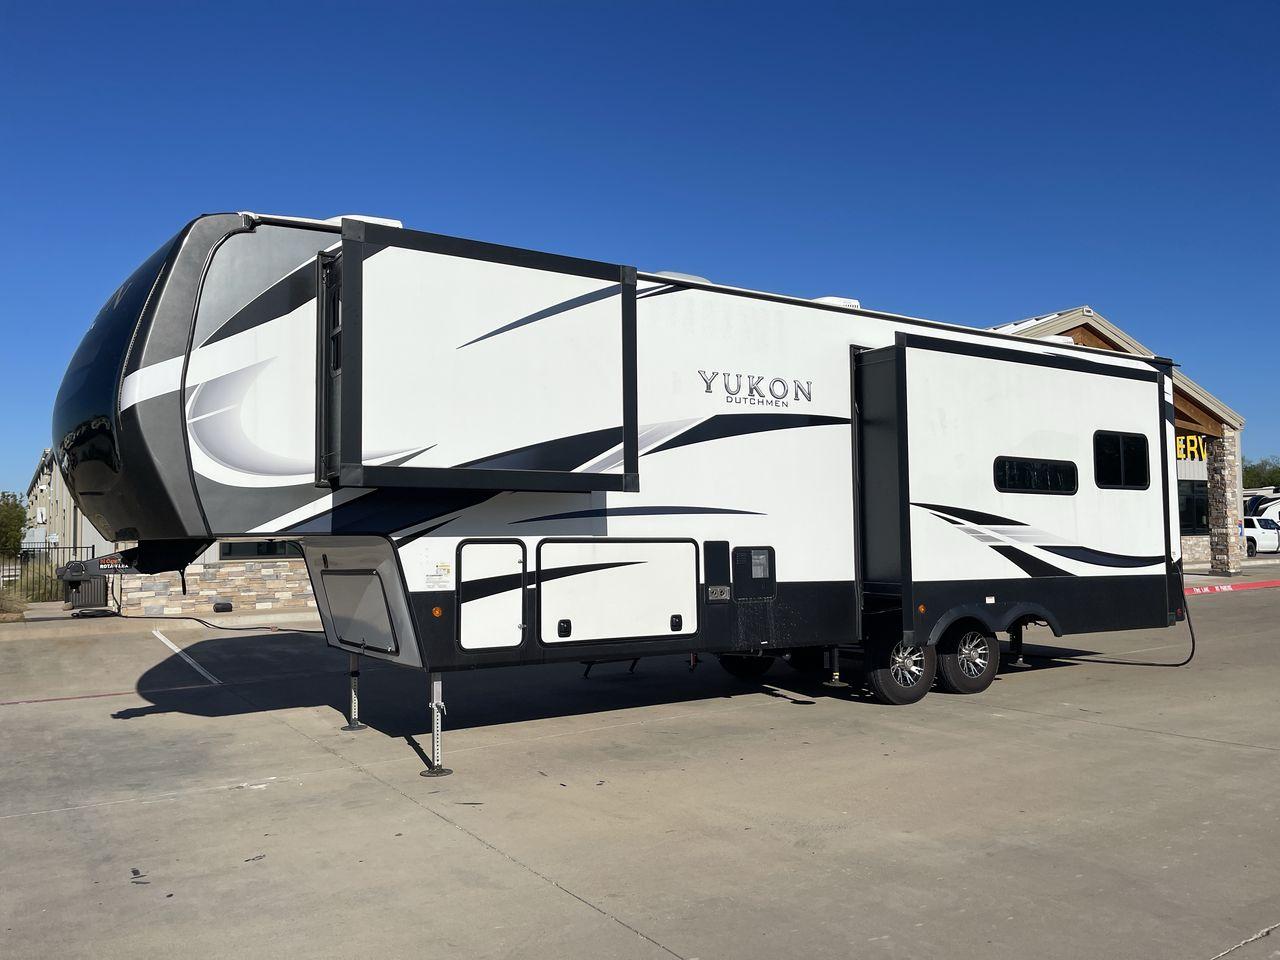 2022 KEYSTONE YUKON 320RL (4YDFYKR28NZ) , Length: 36.5 ft. | Dry Weight: 12,360 lbs. | Slides: 3 transmission, located at 4319 N Main St, Cleburne, TX, 76033, (817) 678-5133, 32.385960, -97.391212 - A high-end fifth wheel that blends elegance and practicality for an unmatched camping experience is the 2022 Keystone Yukon 320RL. This model provides generous living quarters while maintaining exceptional durability. It measures 36.5 feet in length and has a dry weight of 12,360 pounds. The Yukon 3 - Photo #24